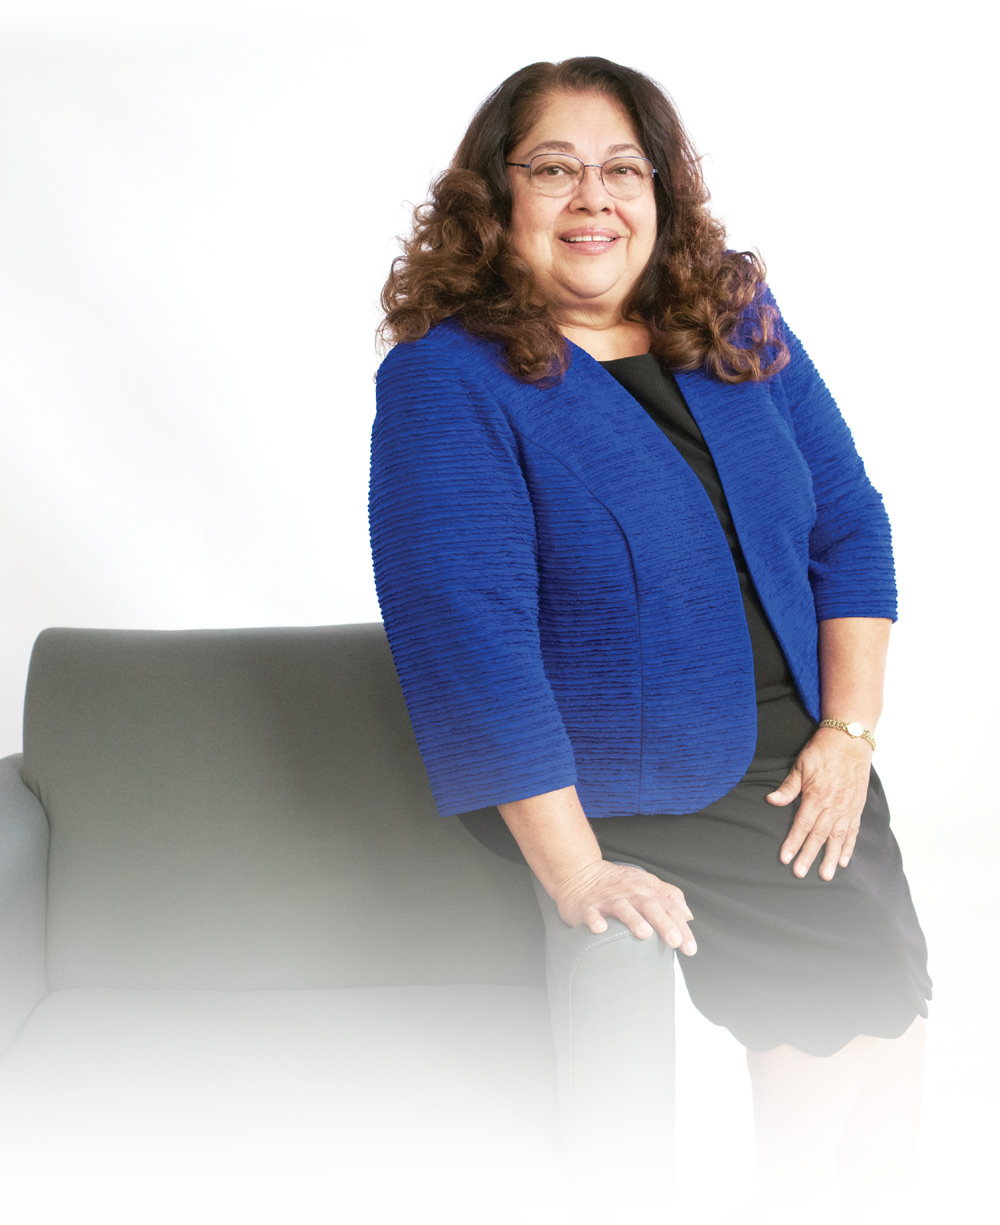 Mary Helen Ybarra leaning against a chair while wearing a blue blazer and black dress